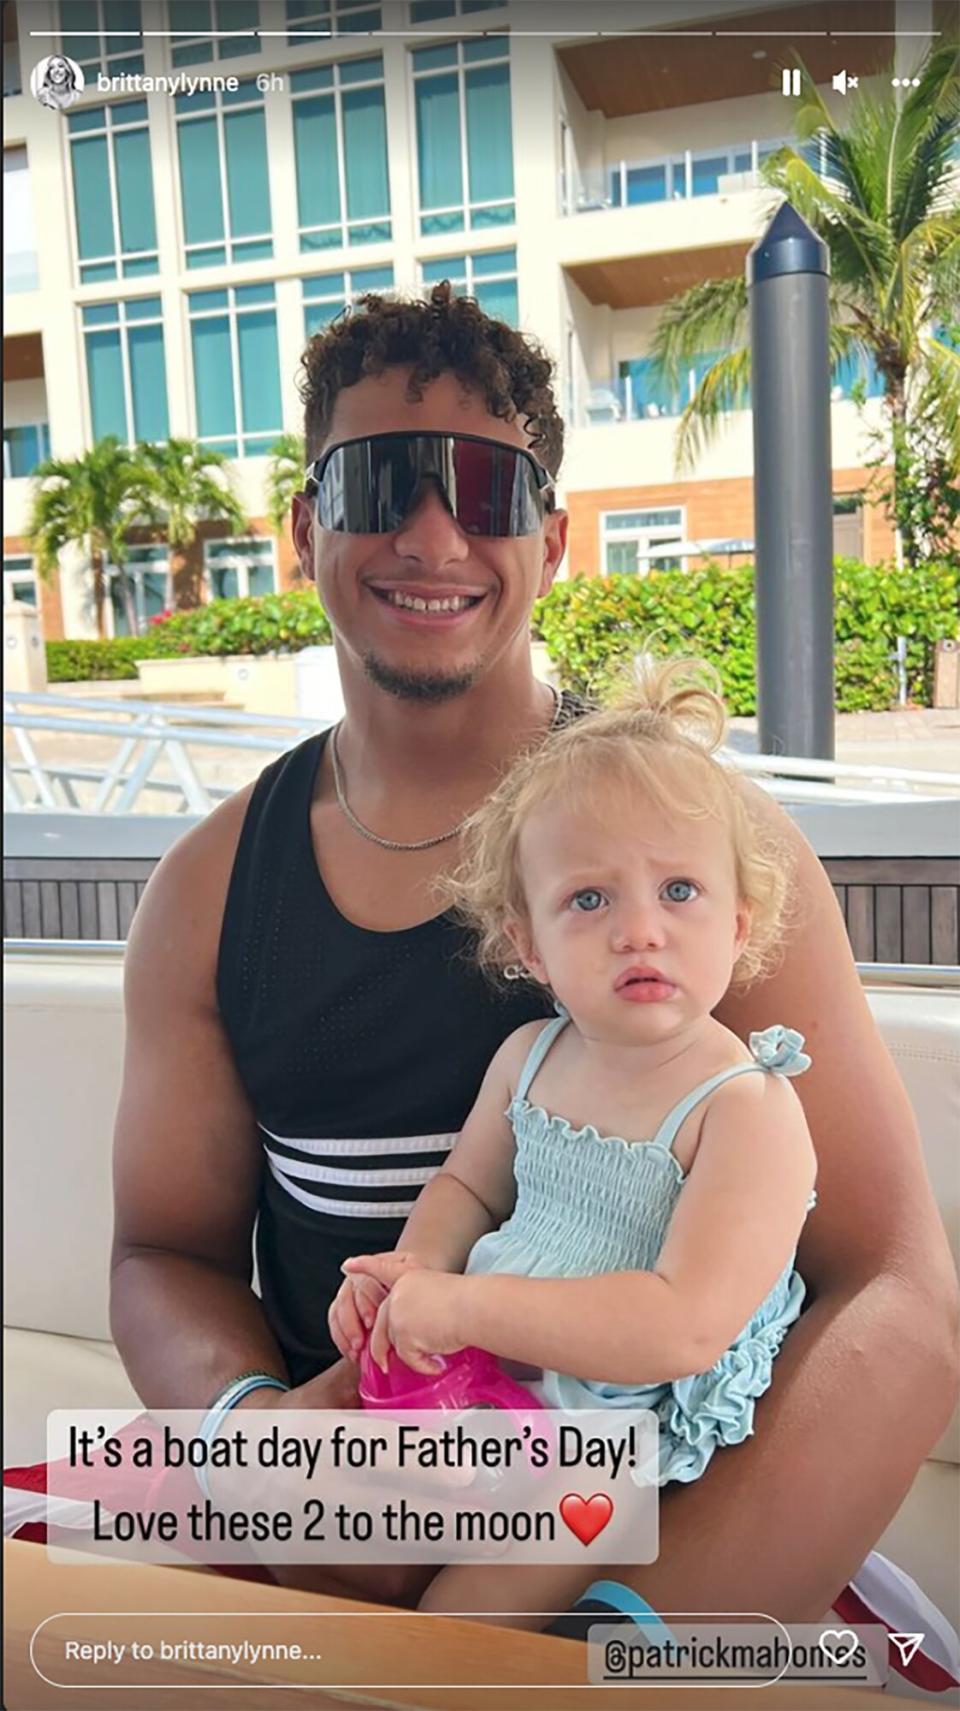  Brittany Mahomes Celebrates Patrick on Father's Day, Baby’s First Boat Ride . https://www.instagram.com/p/Ce_QgpiOcj-/?hl=en